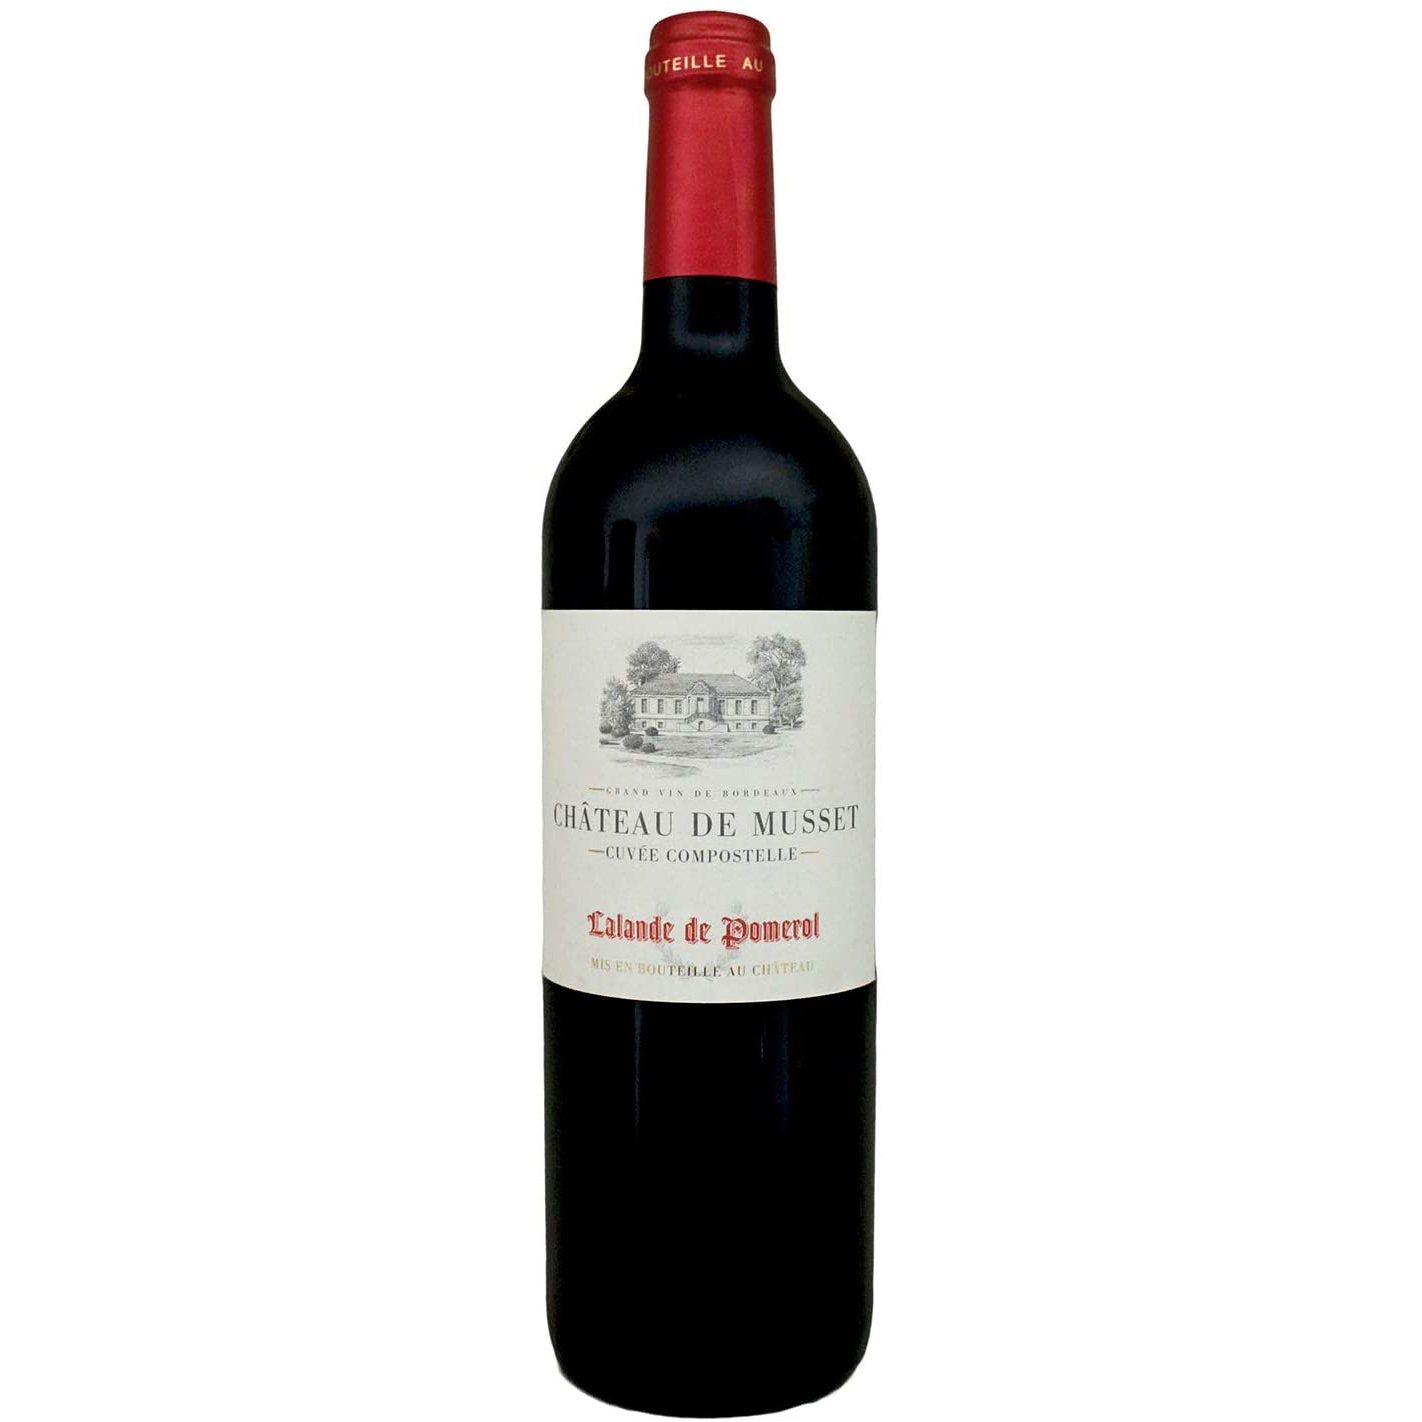 Buy Chateau Musset Bordeaux - Lalande Pomerol Online With Home Delivery